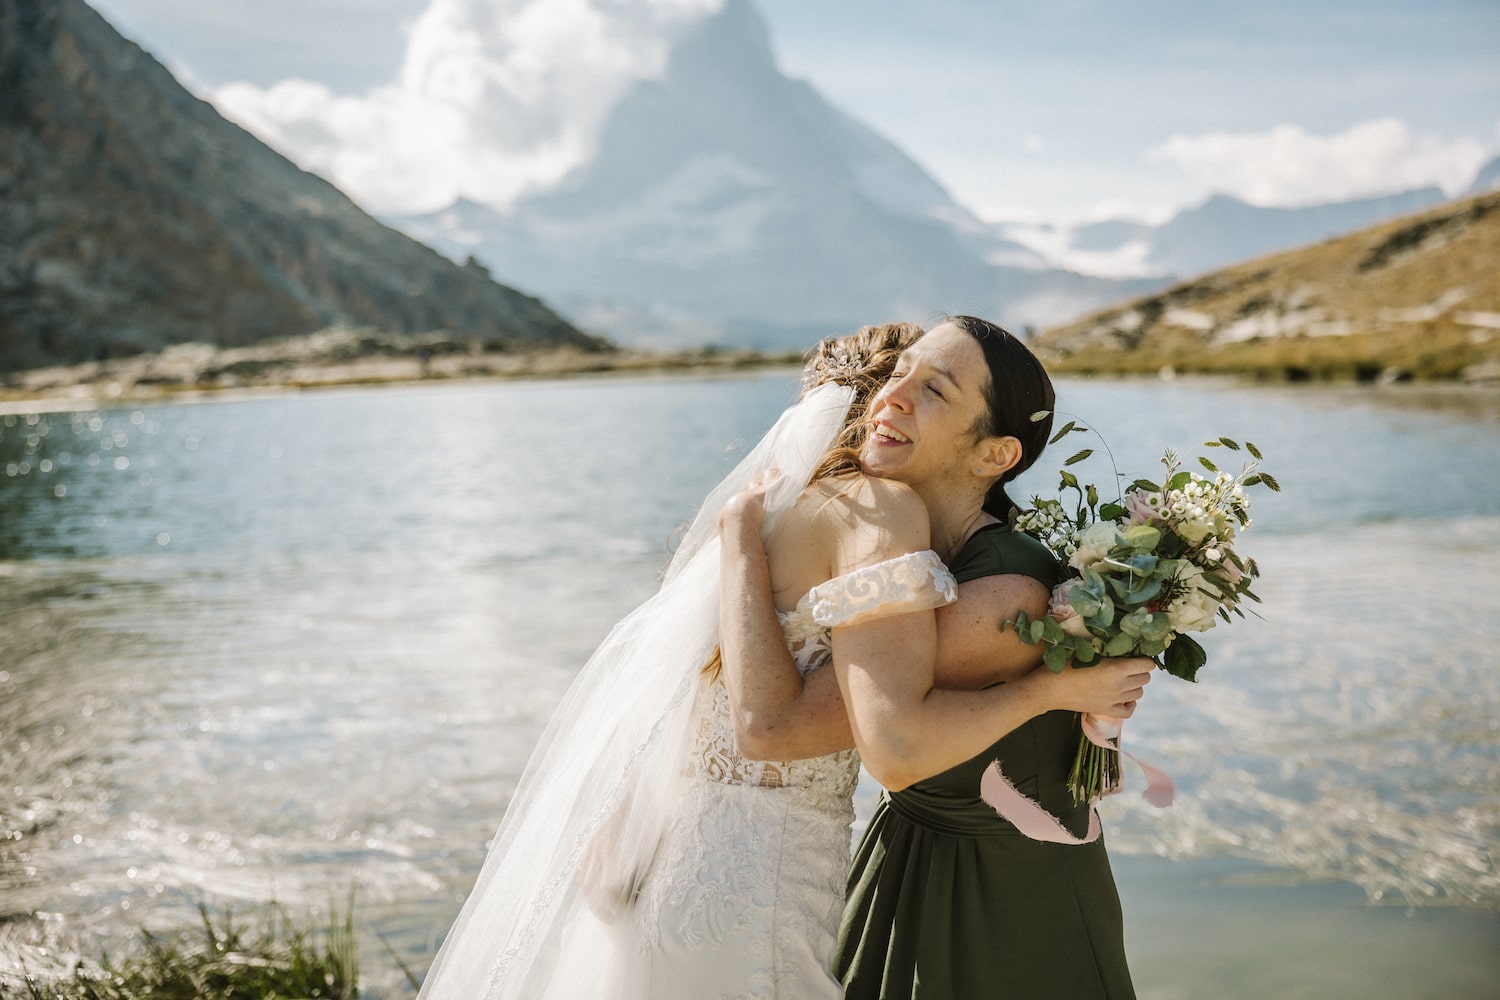 an intimate wedding ceremony celebrated by a multilingual officiant in Switzerland